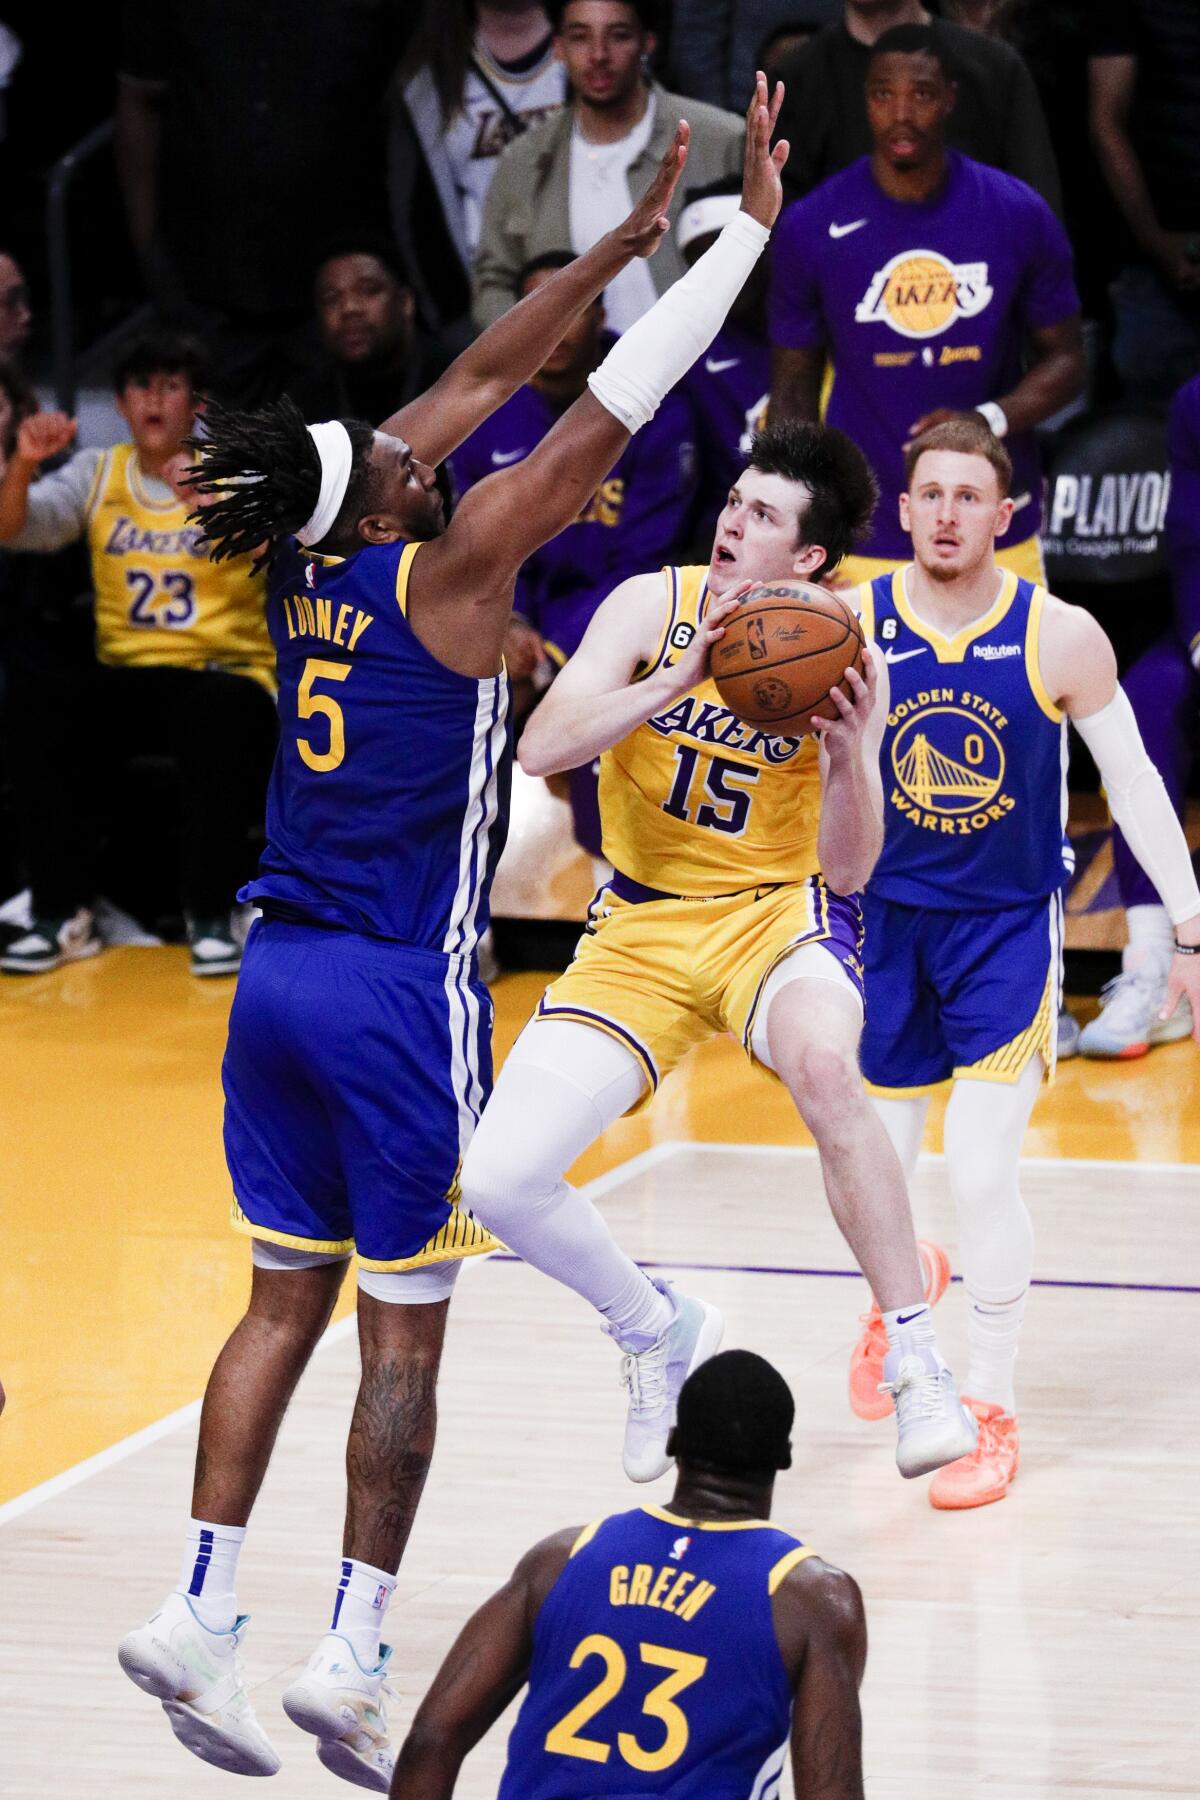 Lakers guard Austin Reaves, right, elevates for a layup against Warriors forward Kevon Looney.